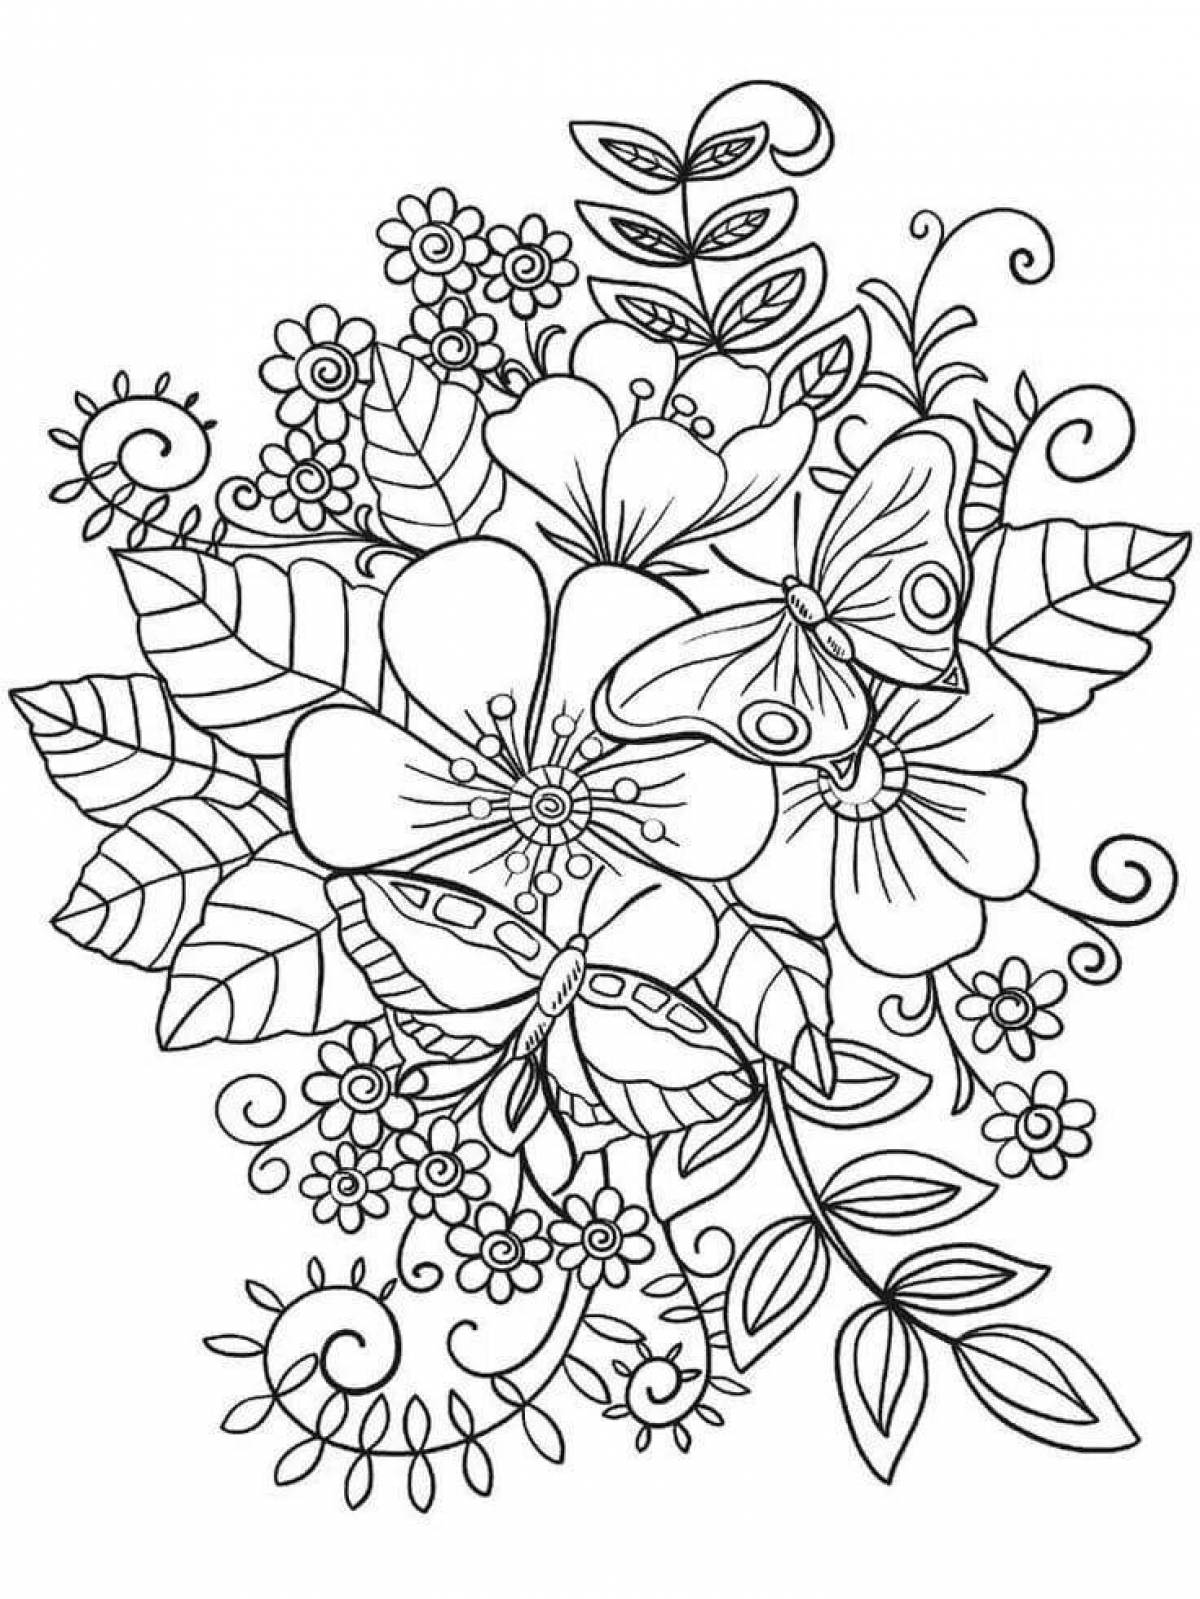 Violent coloring beautiful flowers for girls